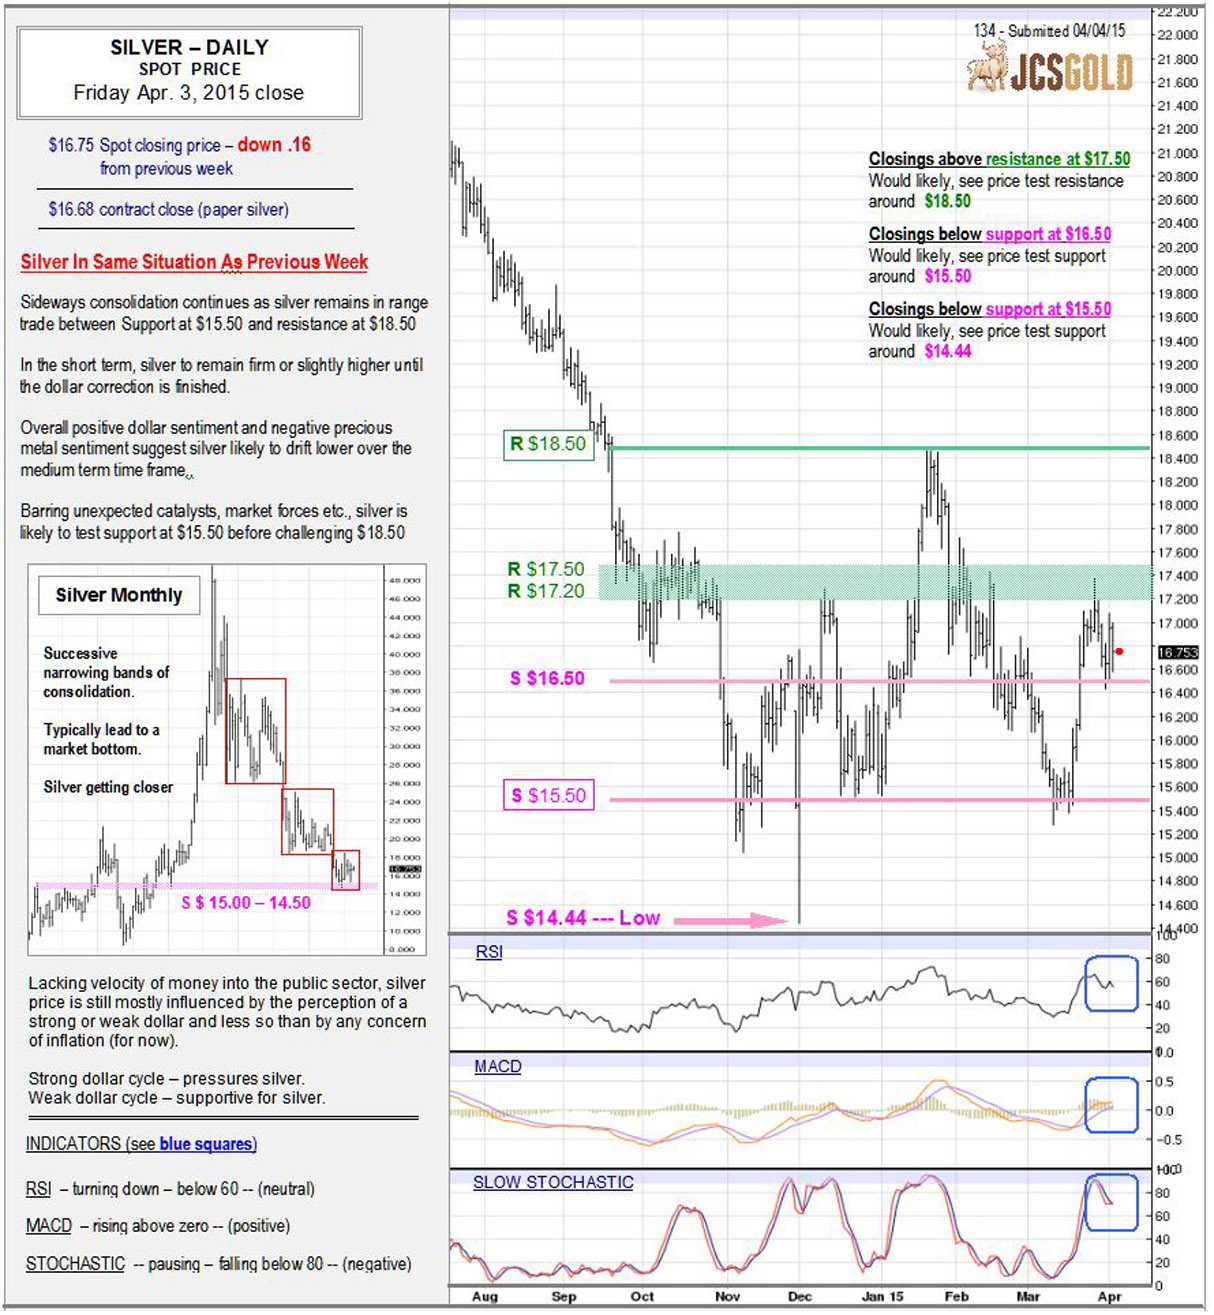 Apr 3, 2015 chart & commentary